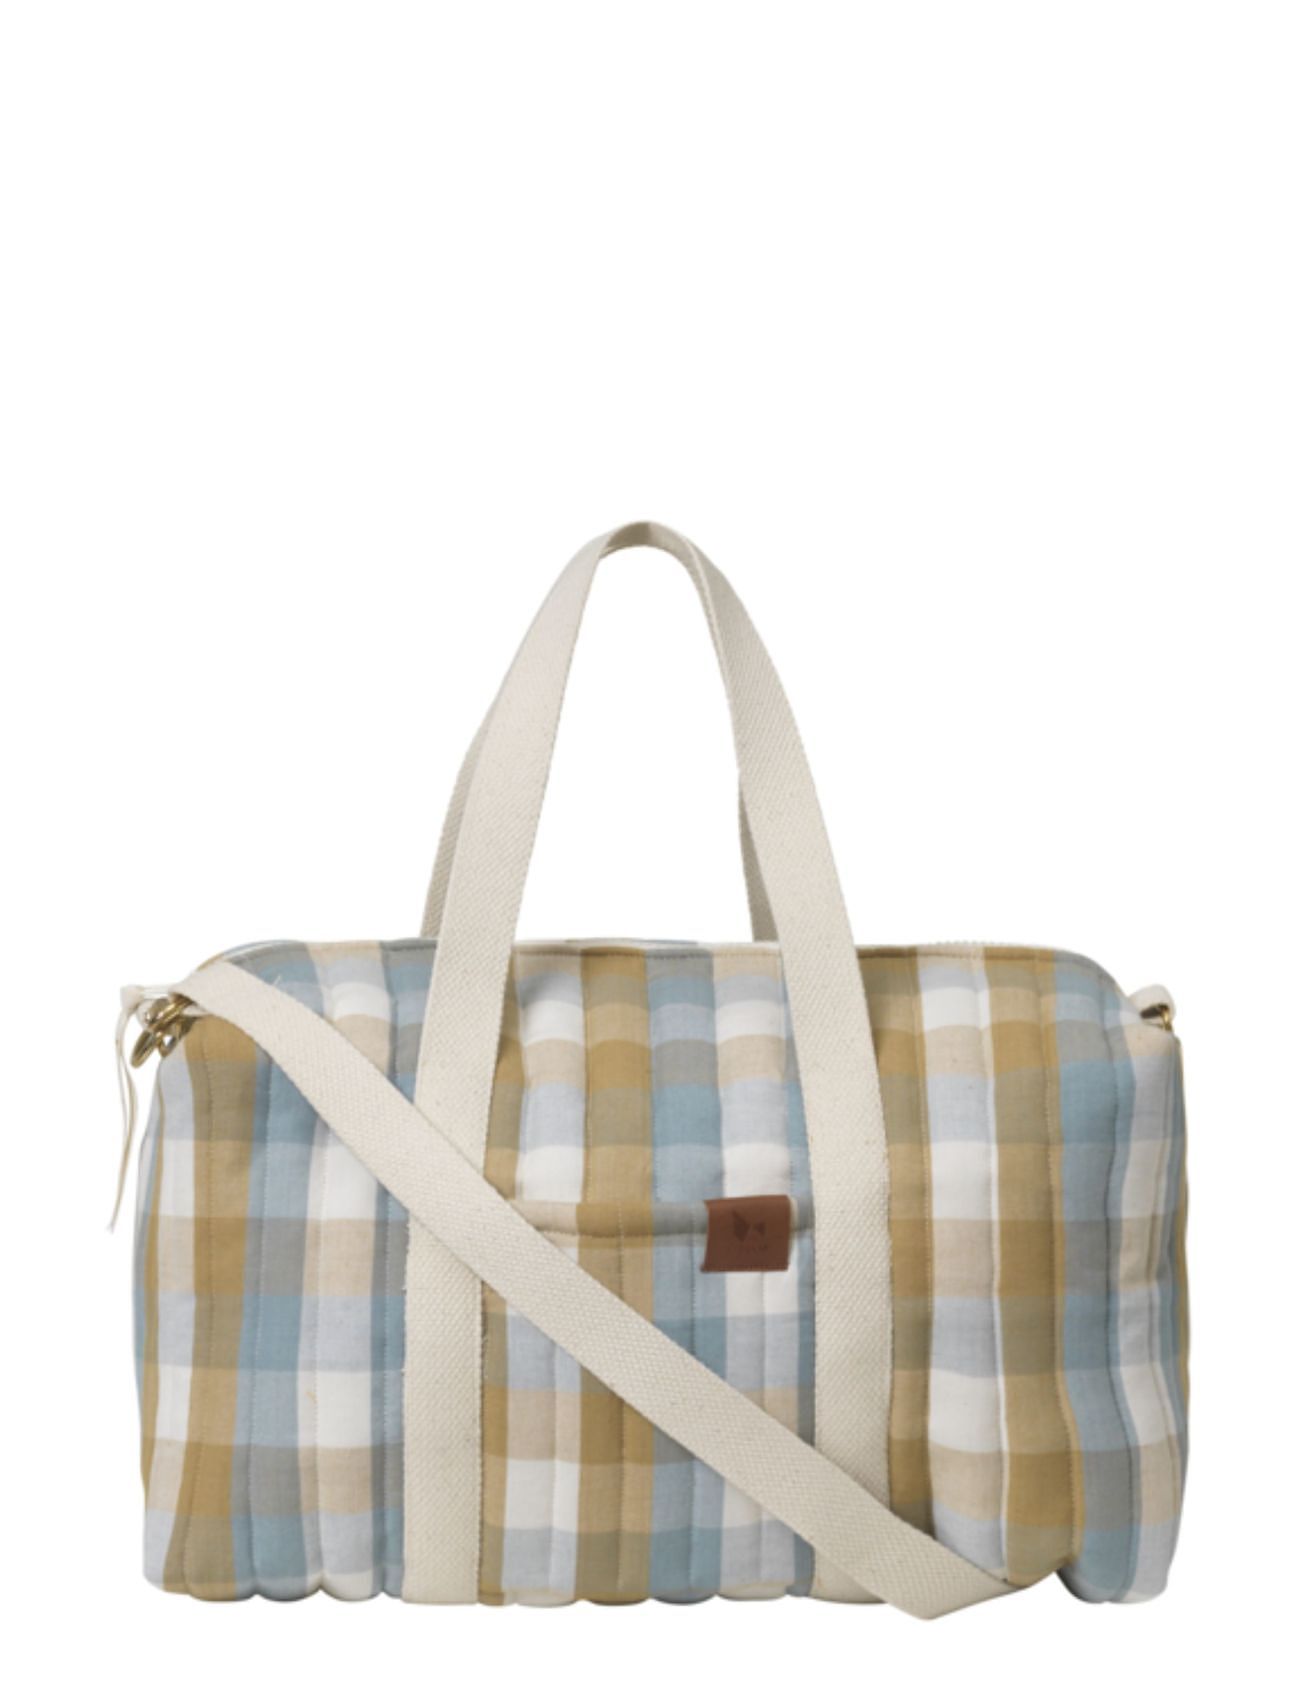 Quilted Gym Bag - Cottage Blue Checks Accessories Bags Sports Bags Multi/patterned Fabelab